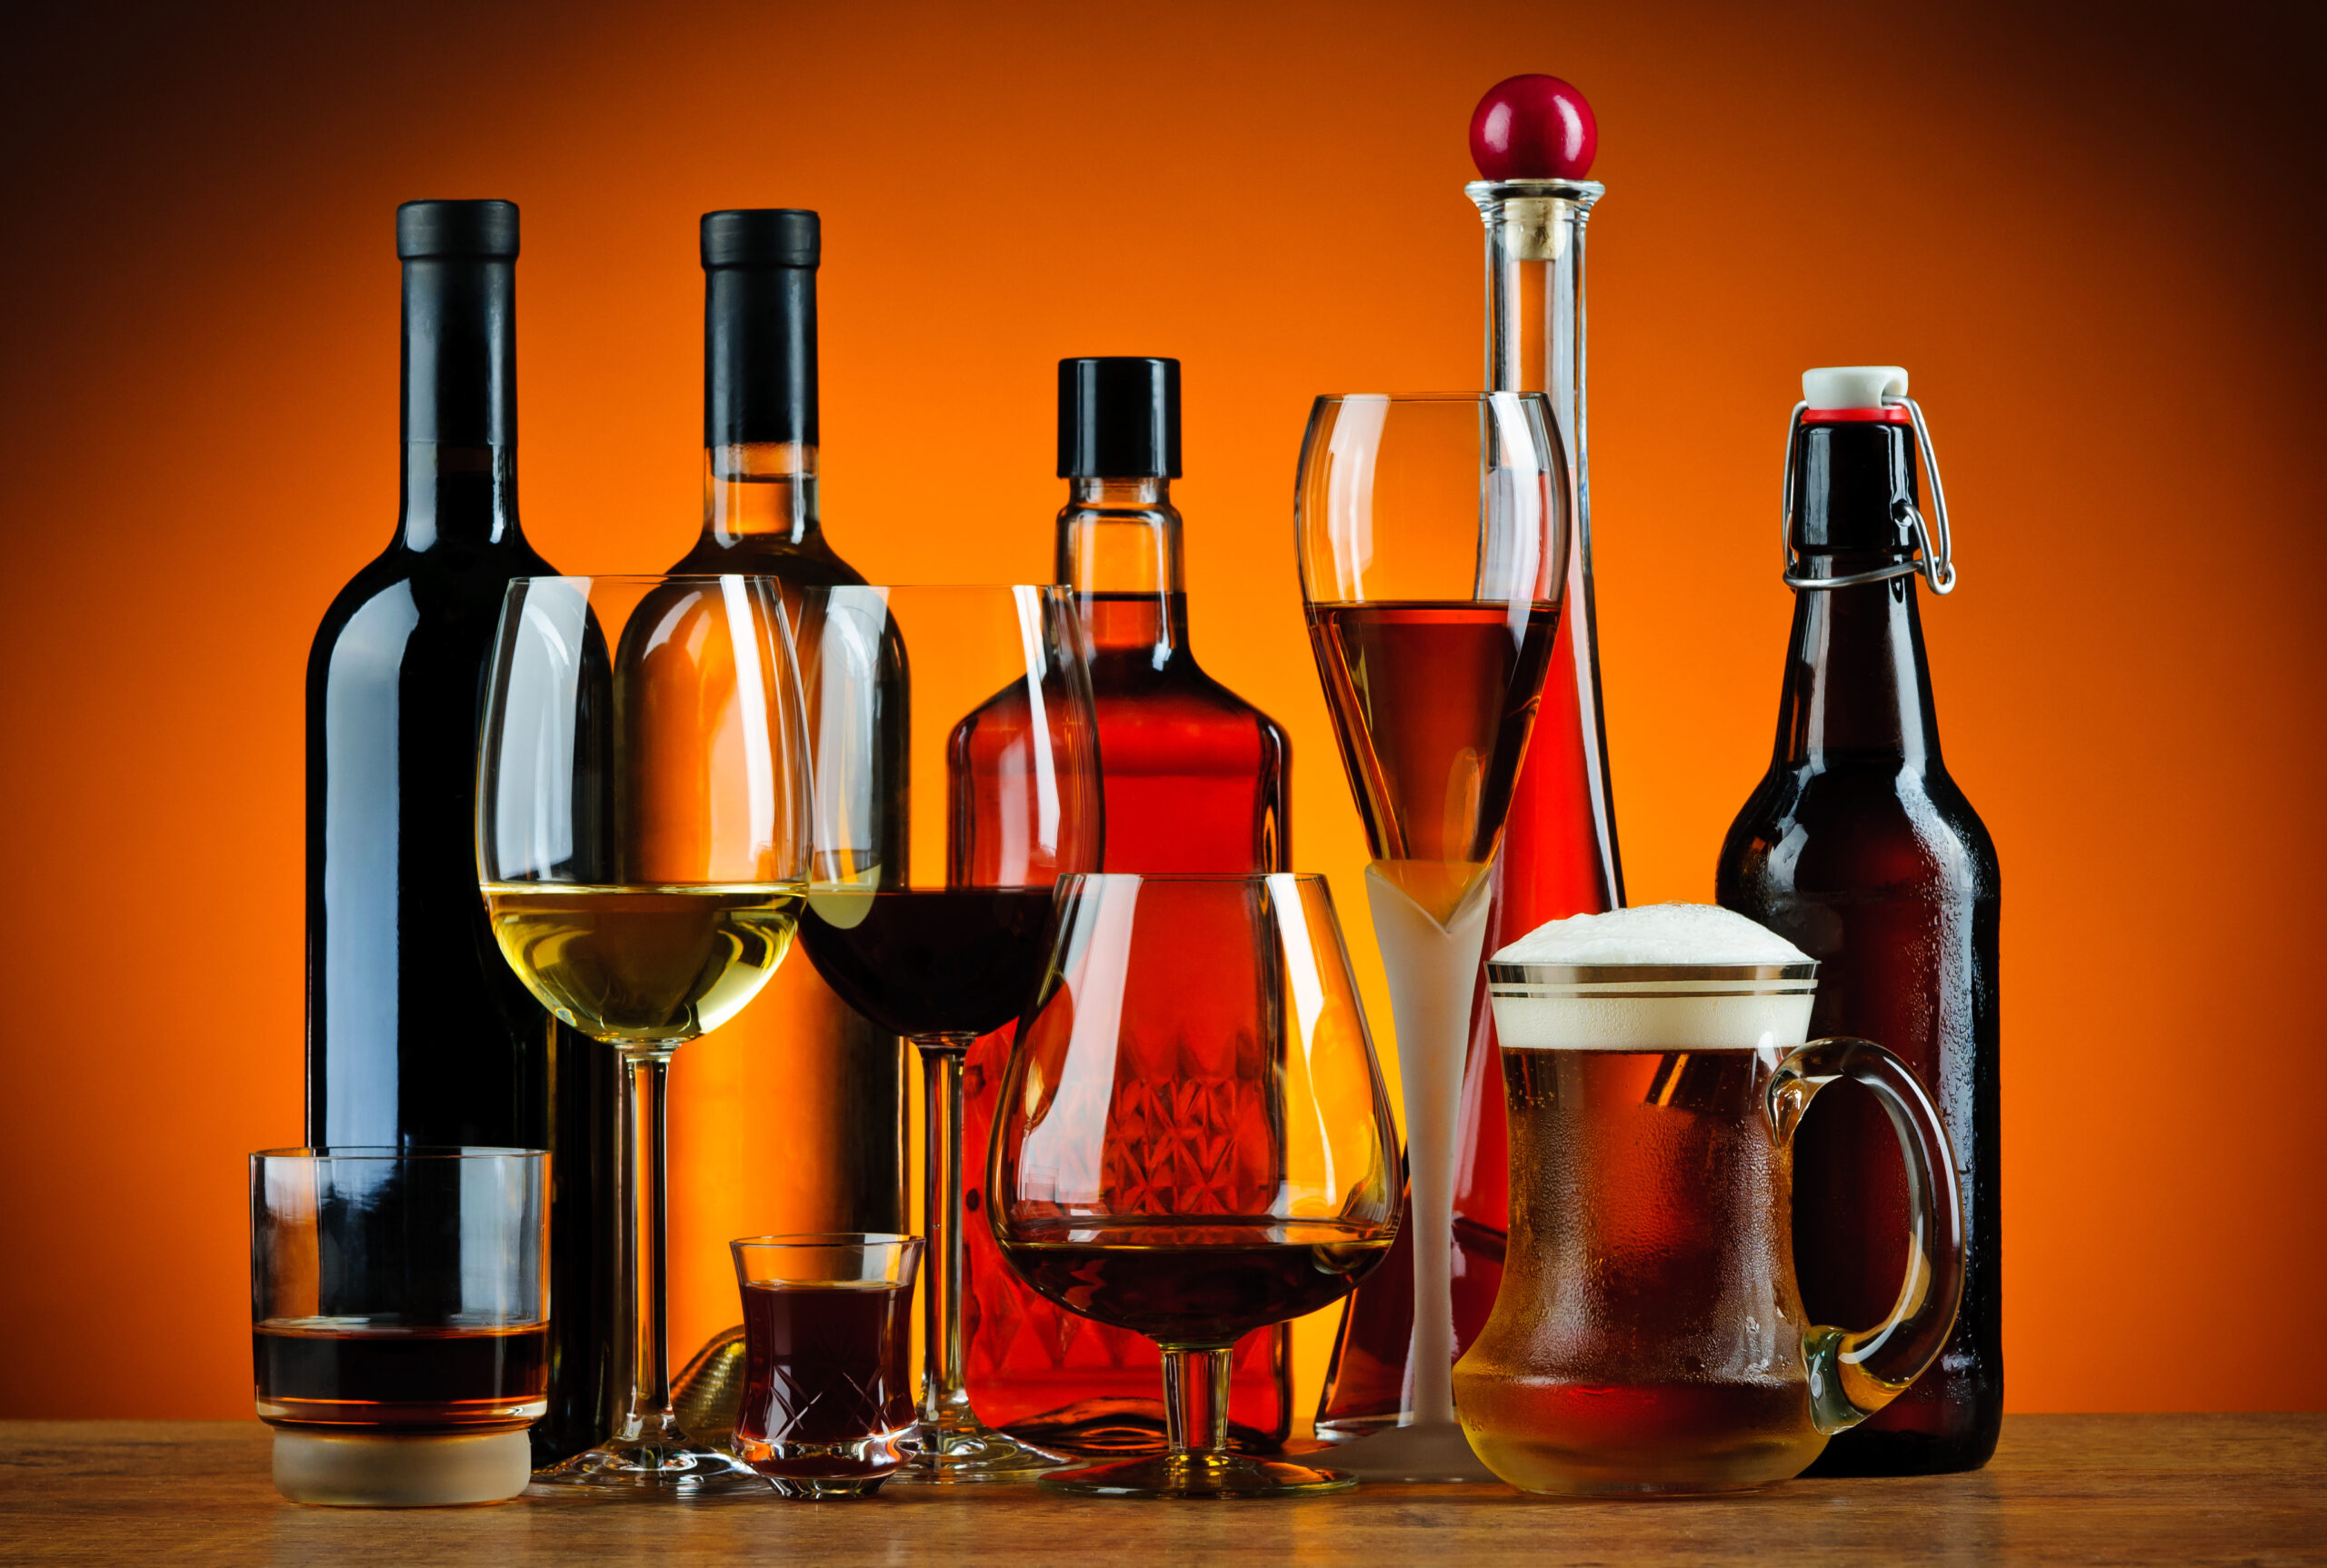 Dangerous Levels Of Toxic Elements Found in Alcohol Bottles